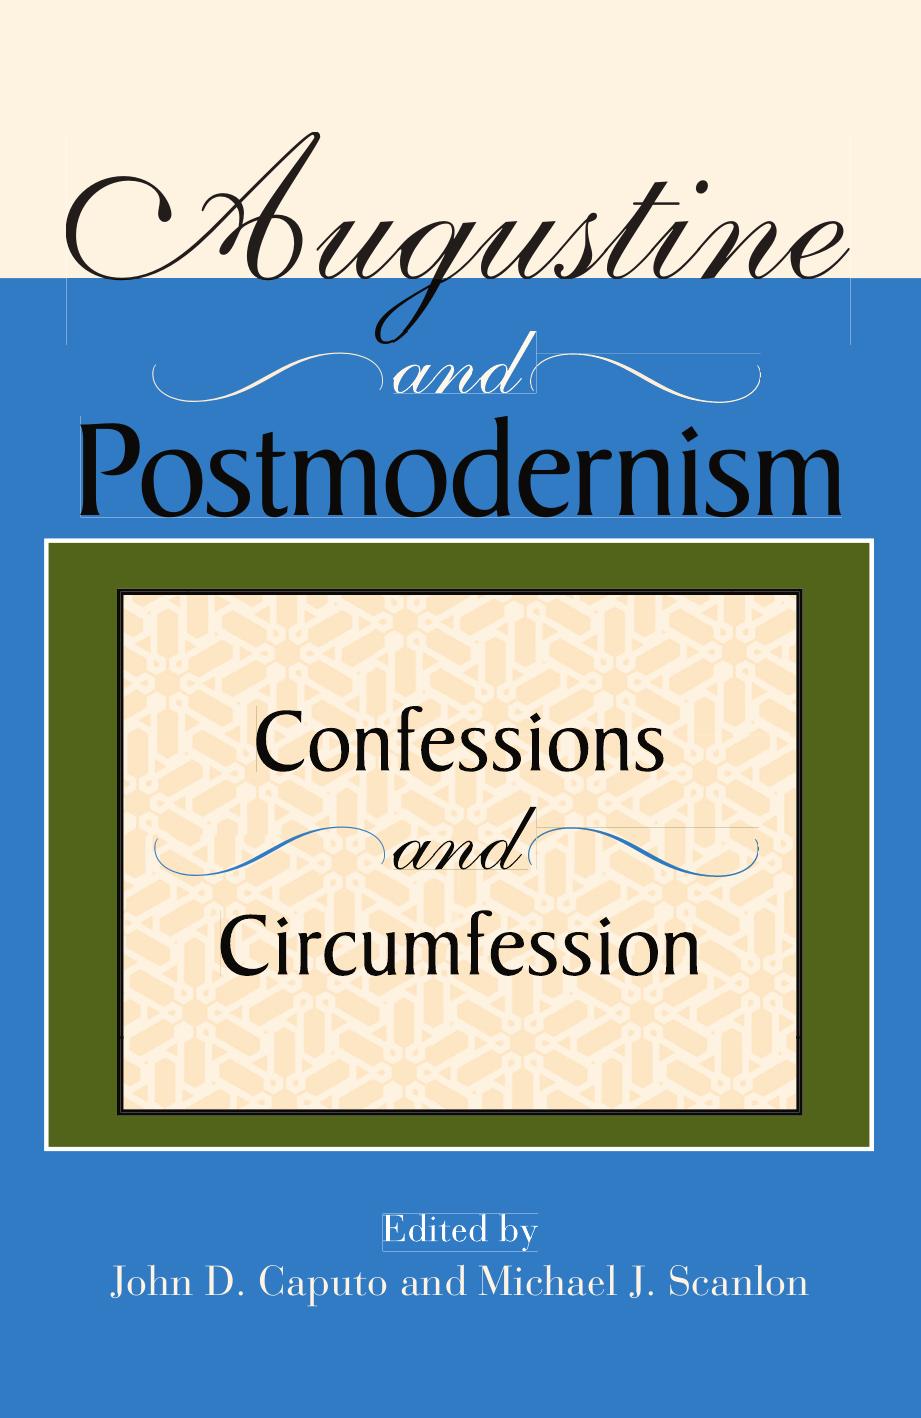 Indiana University Press Augustine and Postmodernism, Confession and Circumfession (2005)